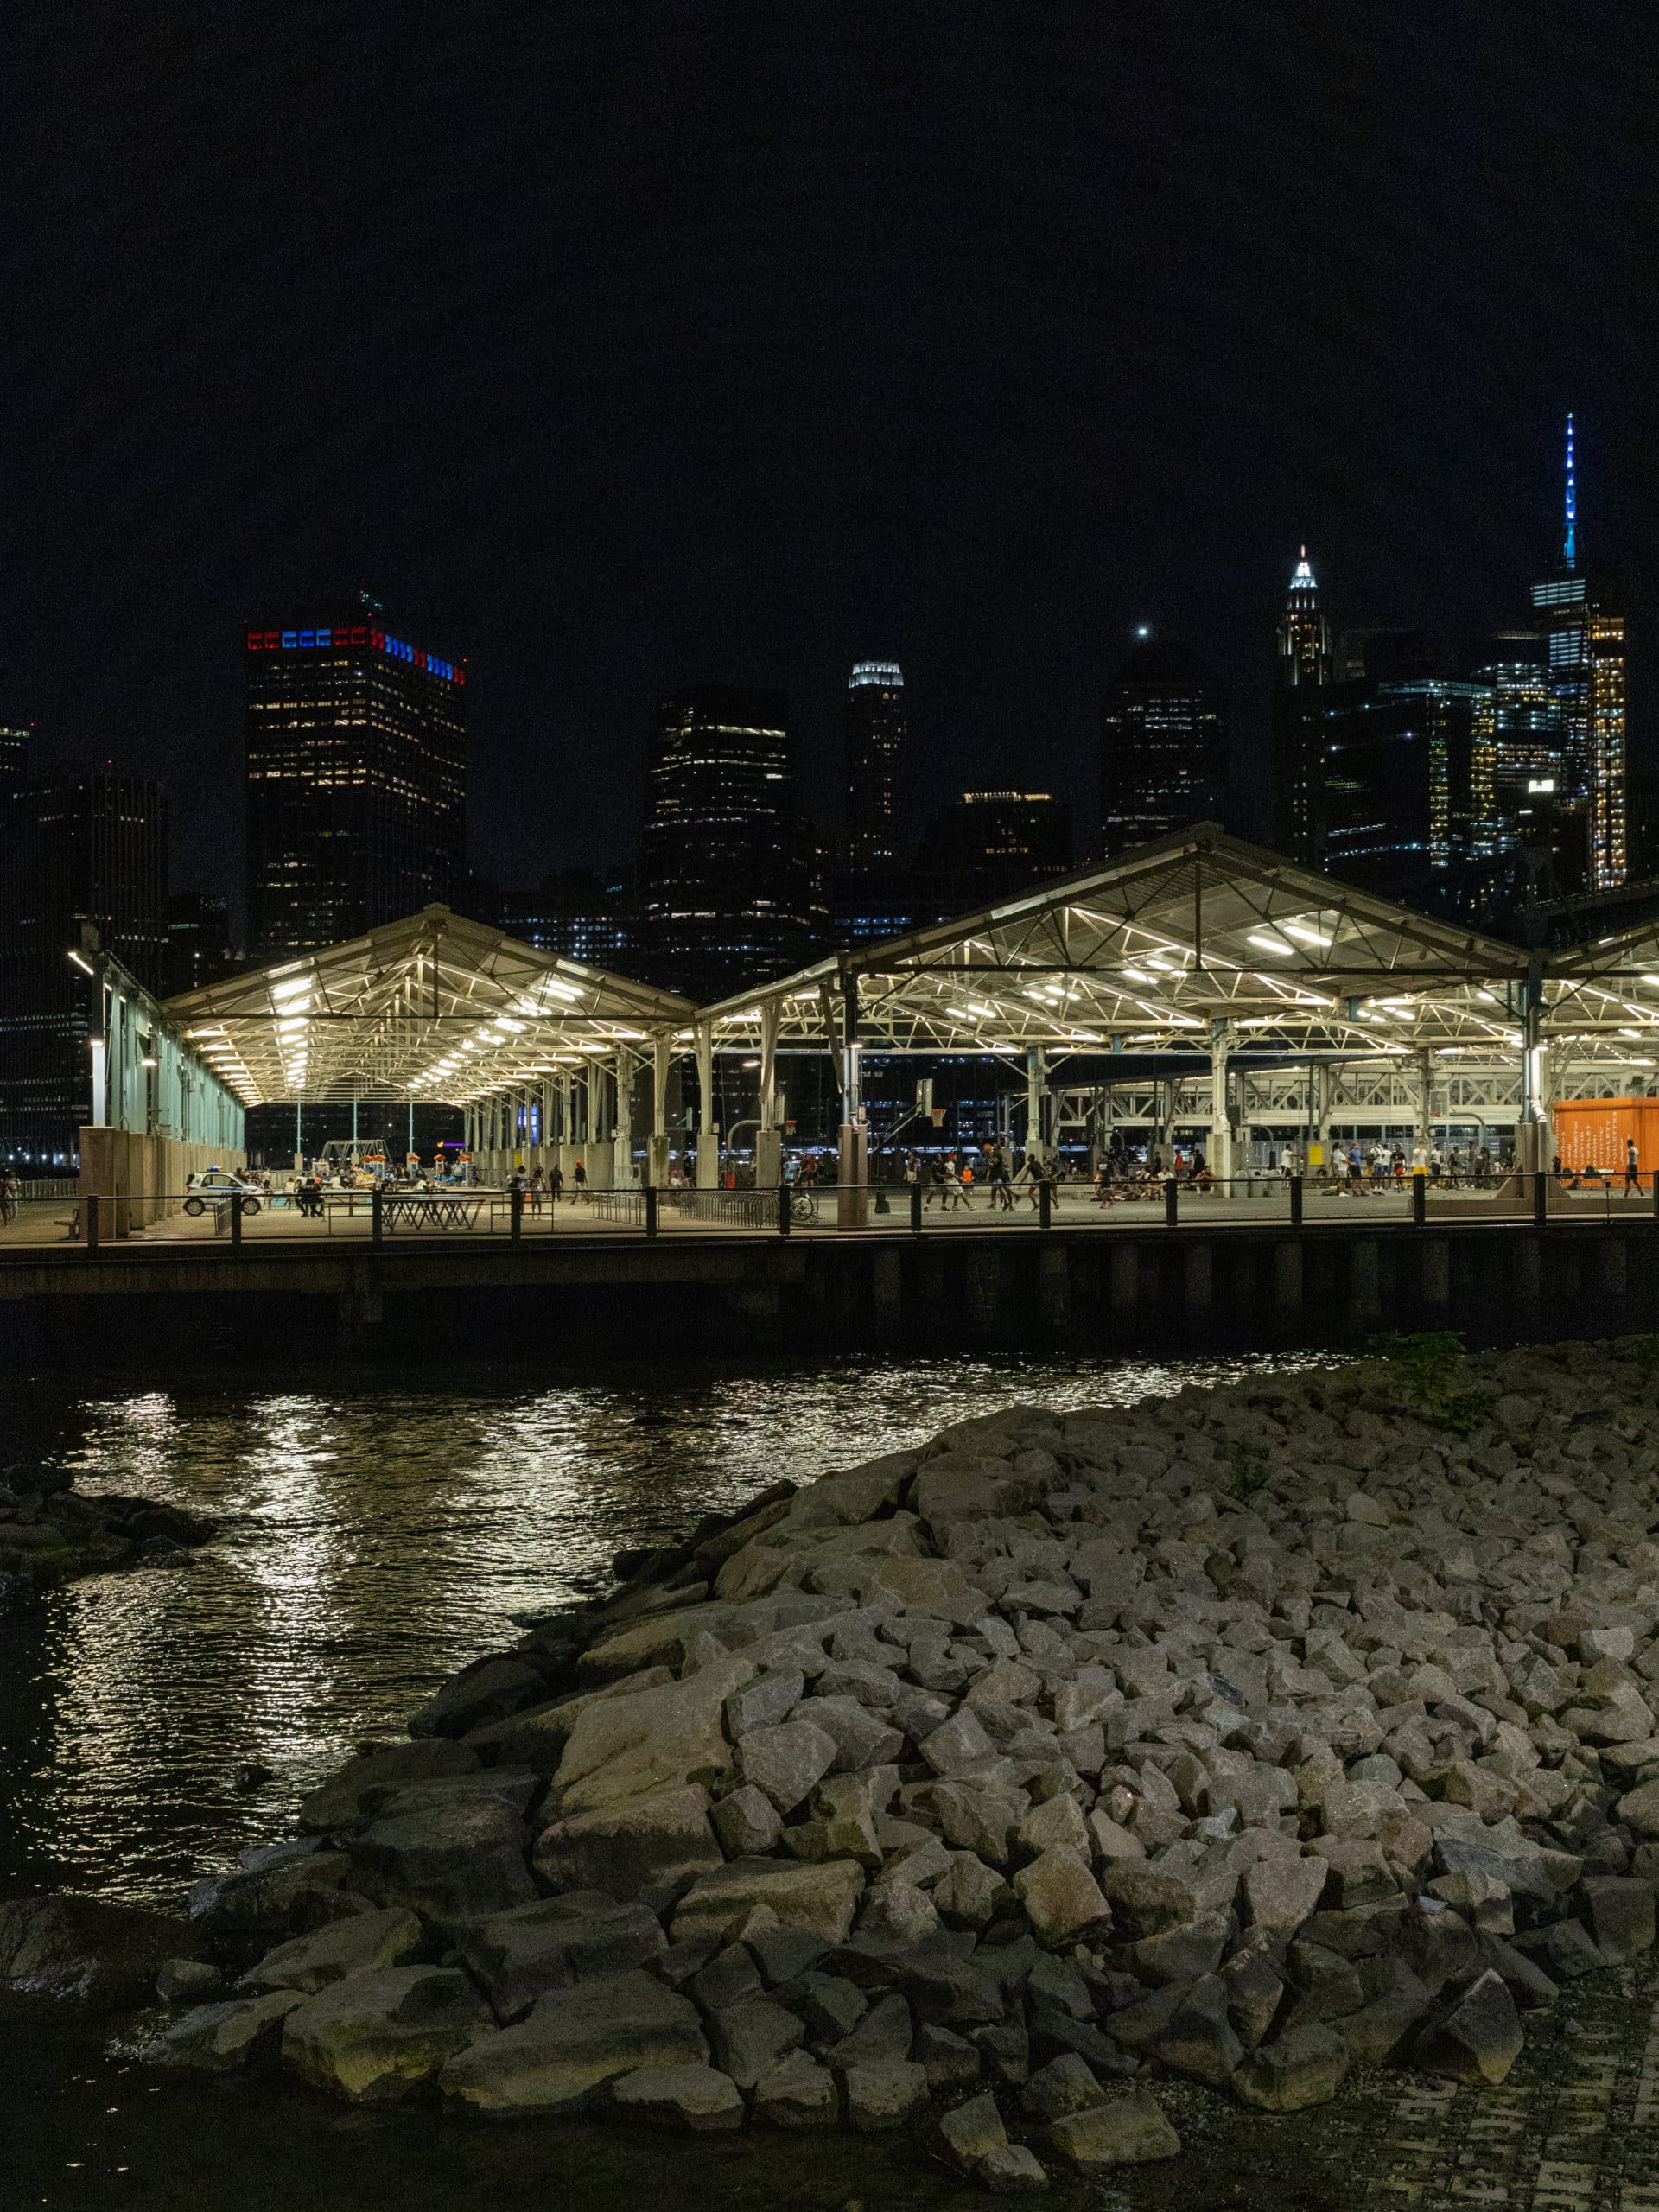 View of Pier 2 at night from the rocks by the Greenway path.